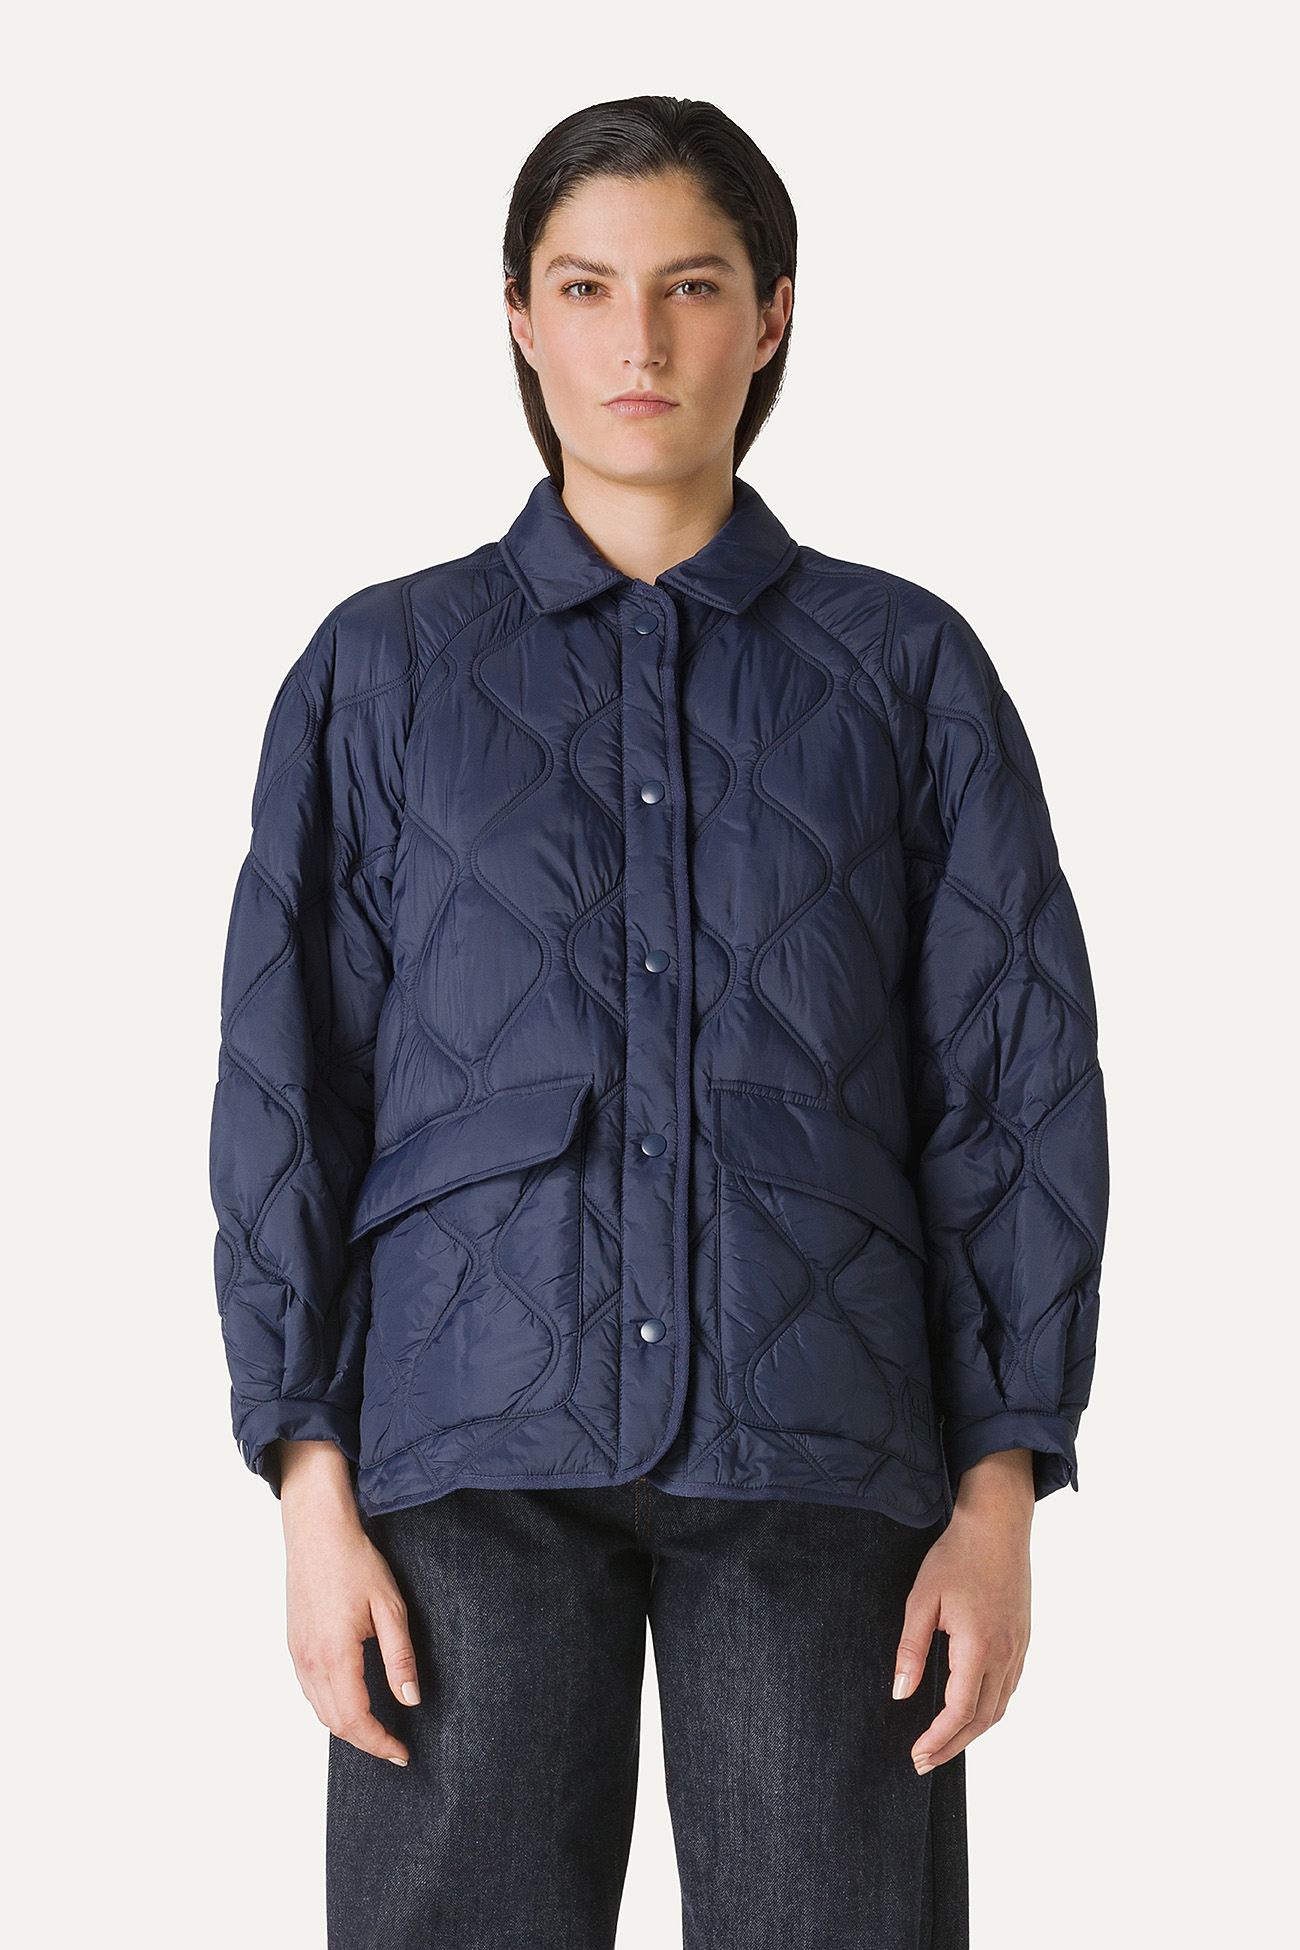 OVERSIZE SHACKET IN QUILTED LIGHT NYLON 9222 - MIDNIGHT BLUE - OOF WEAR